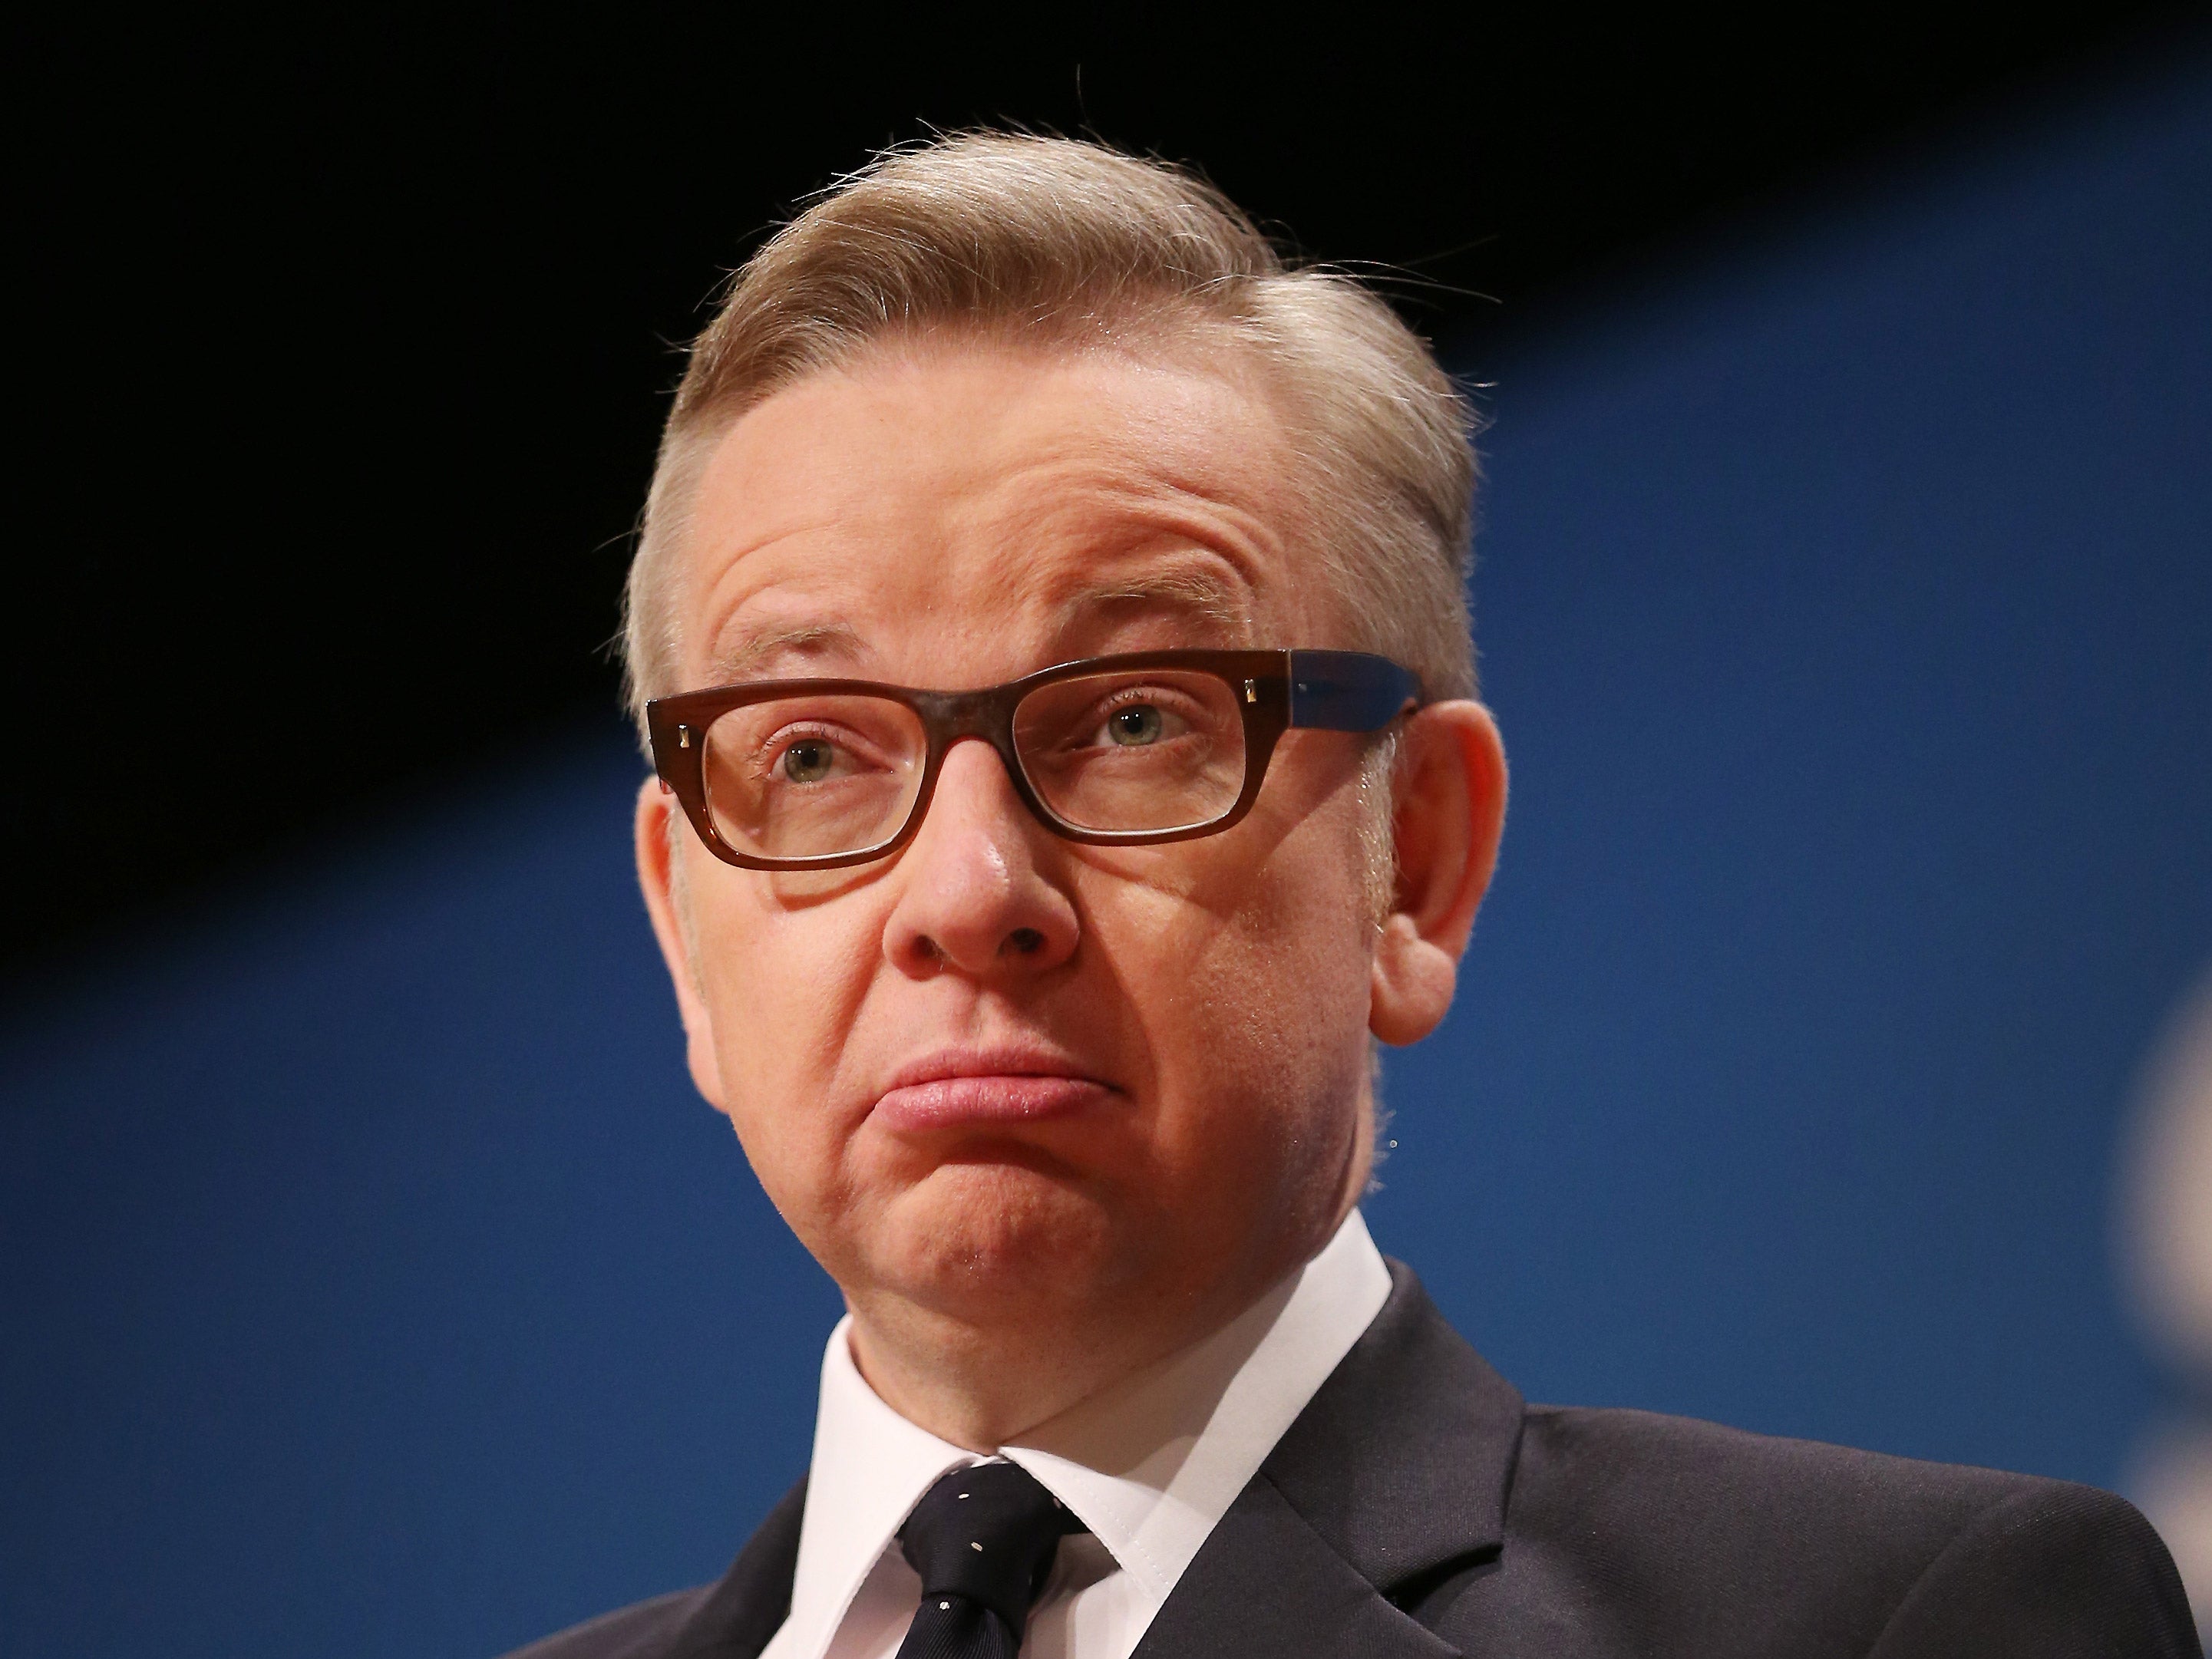 Michael Gove, Minister of Justice